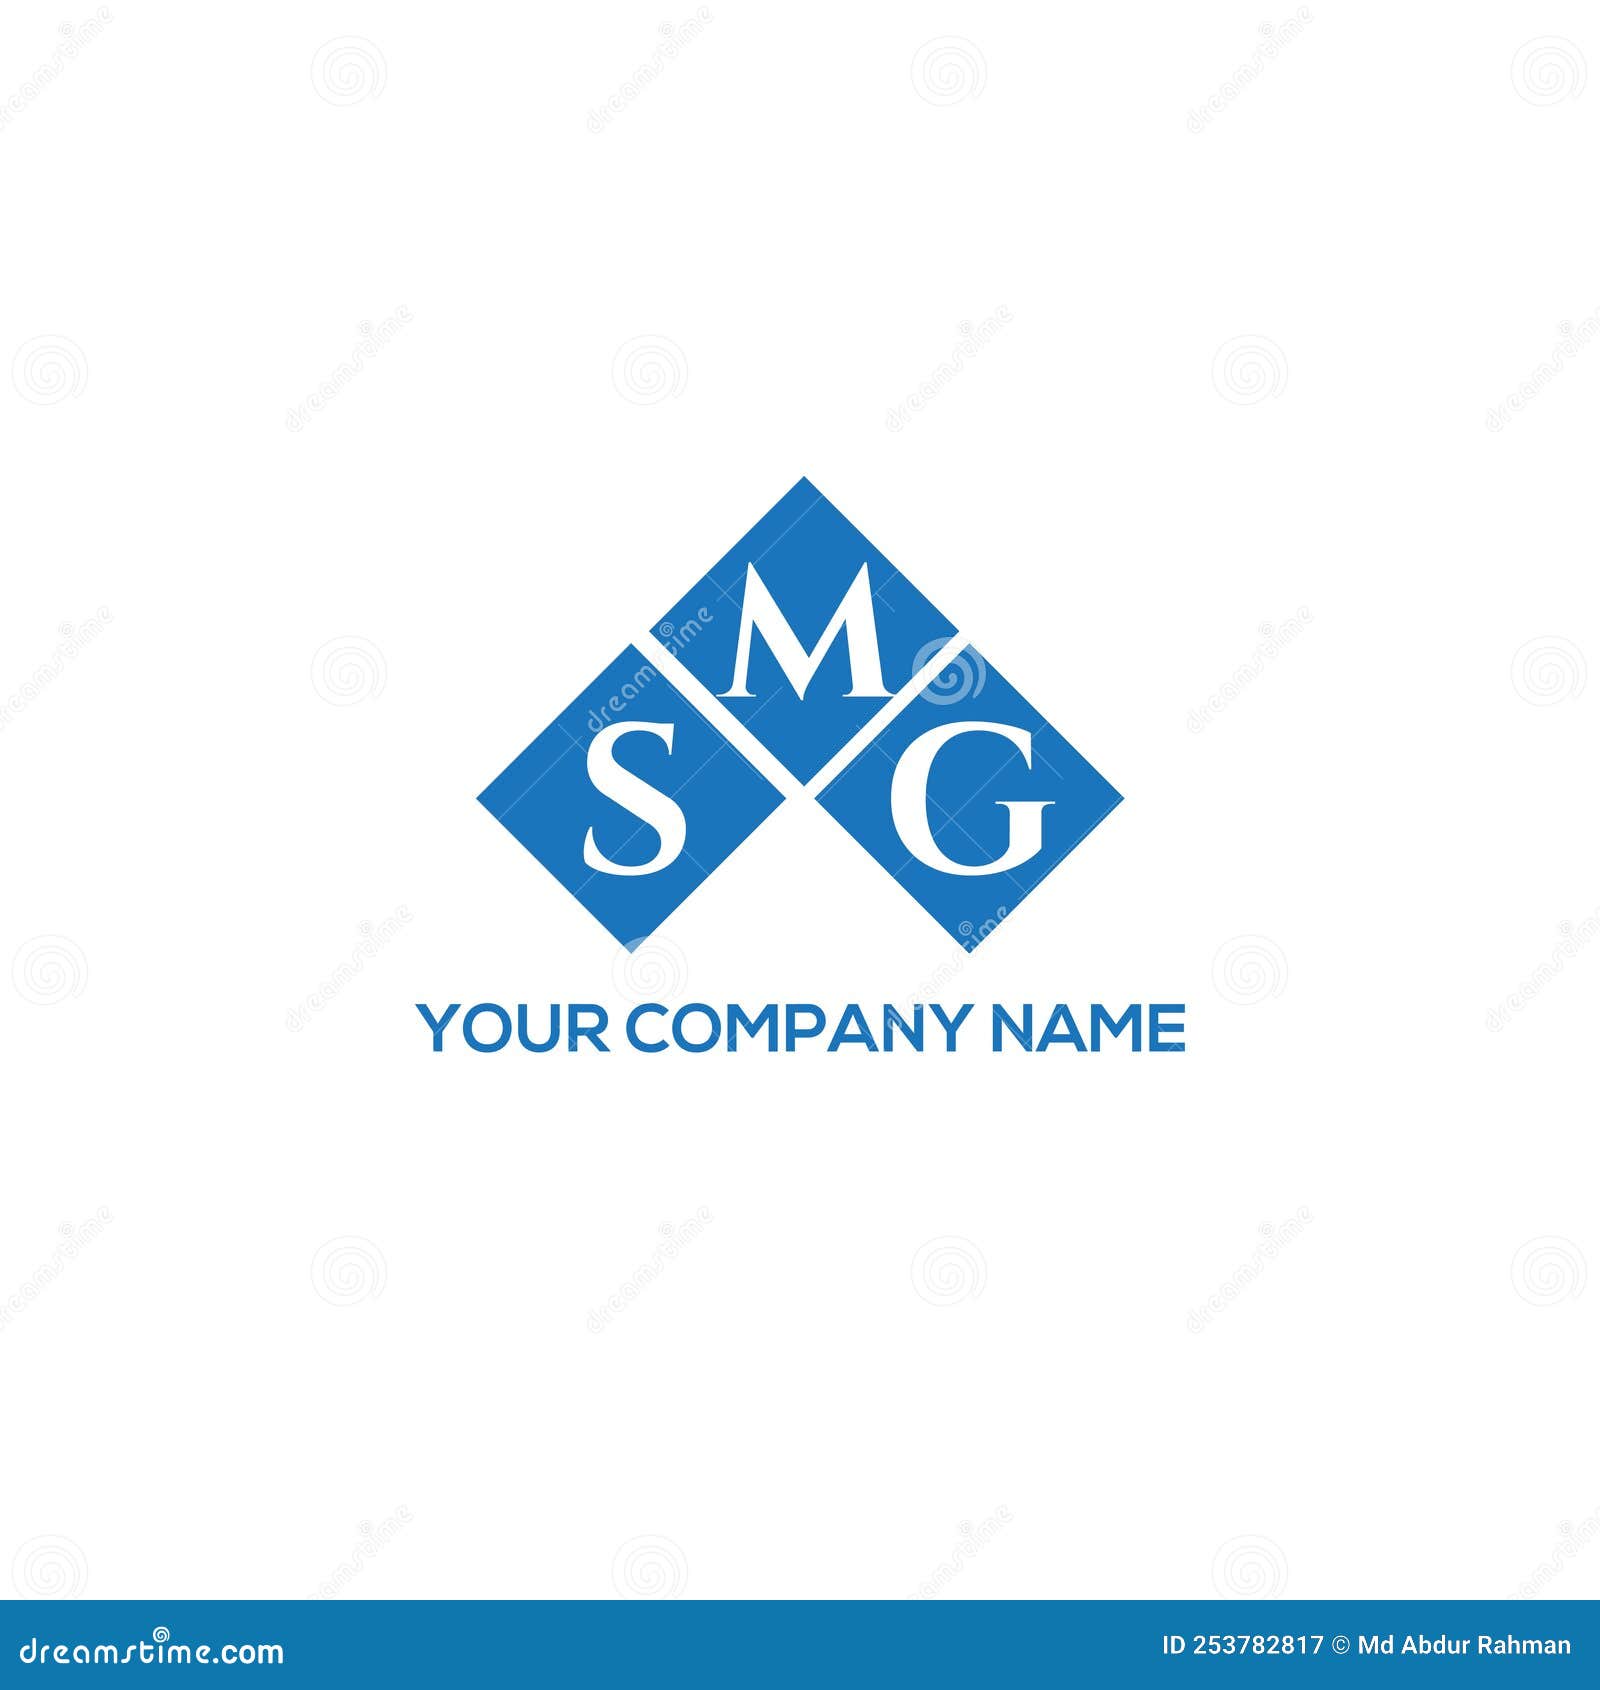 smg letter logo  on white background. smg creative initials letter logo concept.